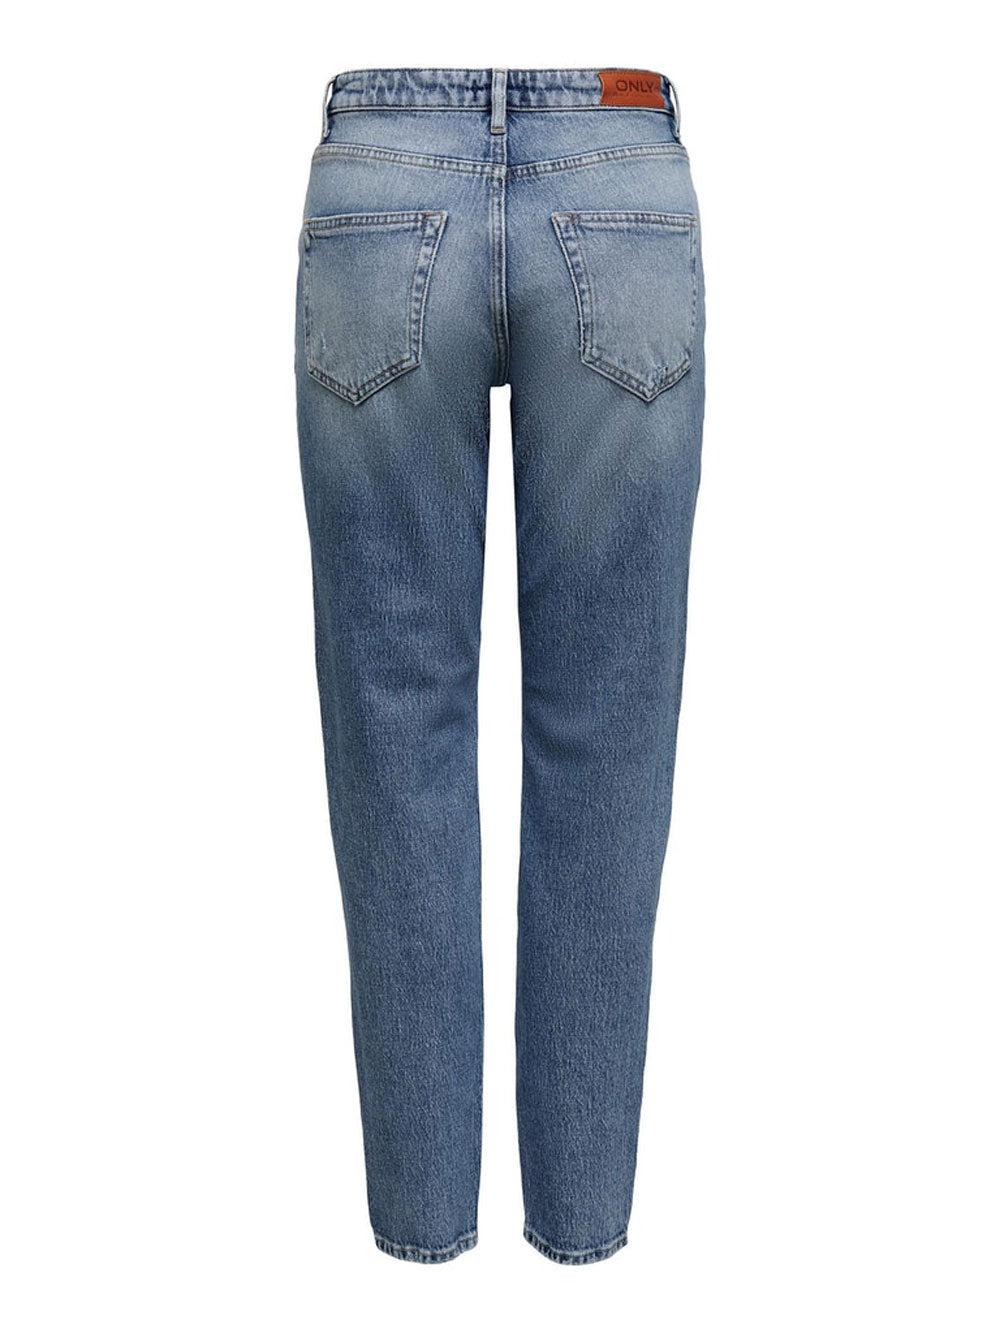 ONLY Onlveneda jeans donna con rotture